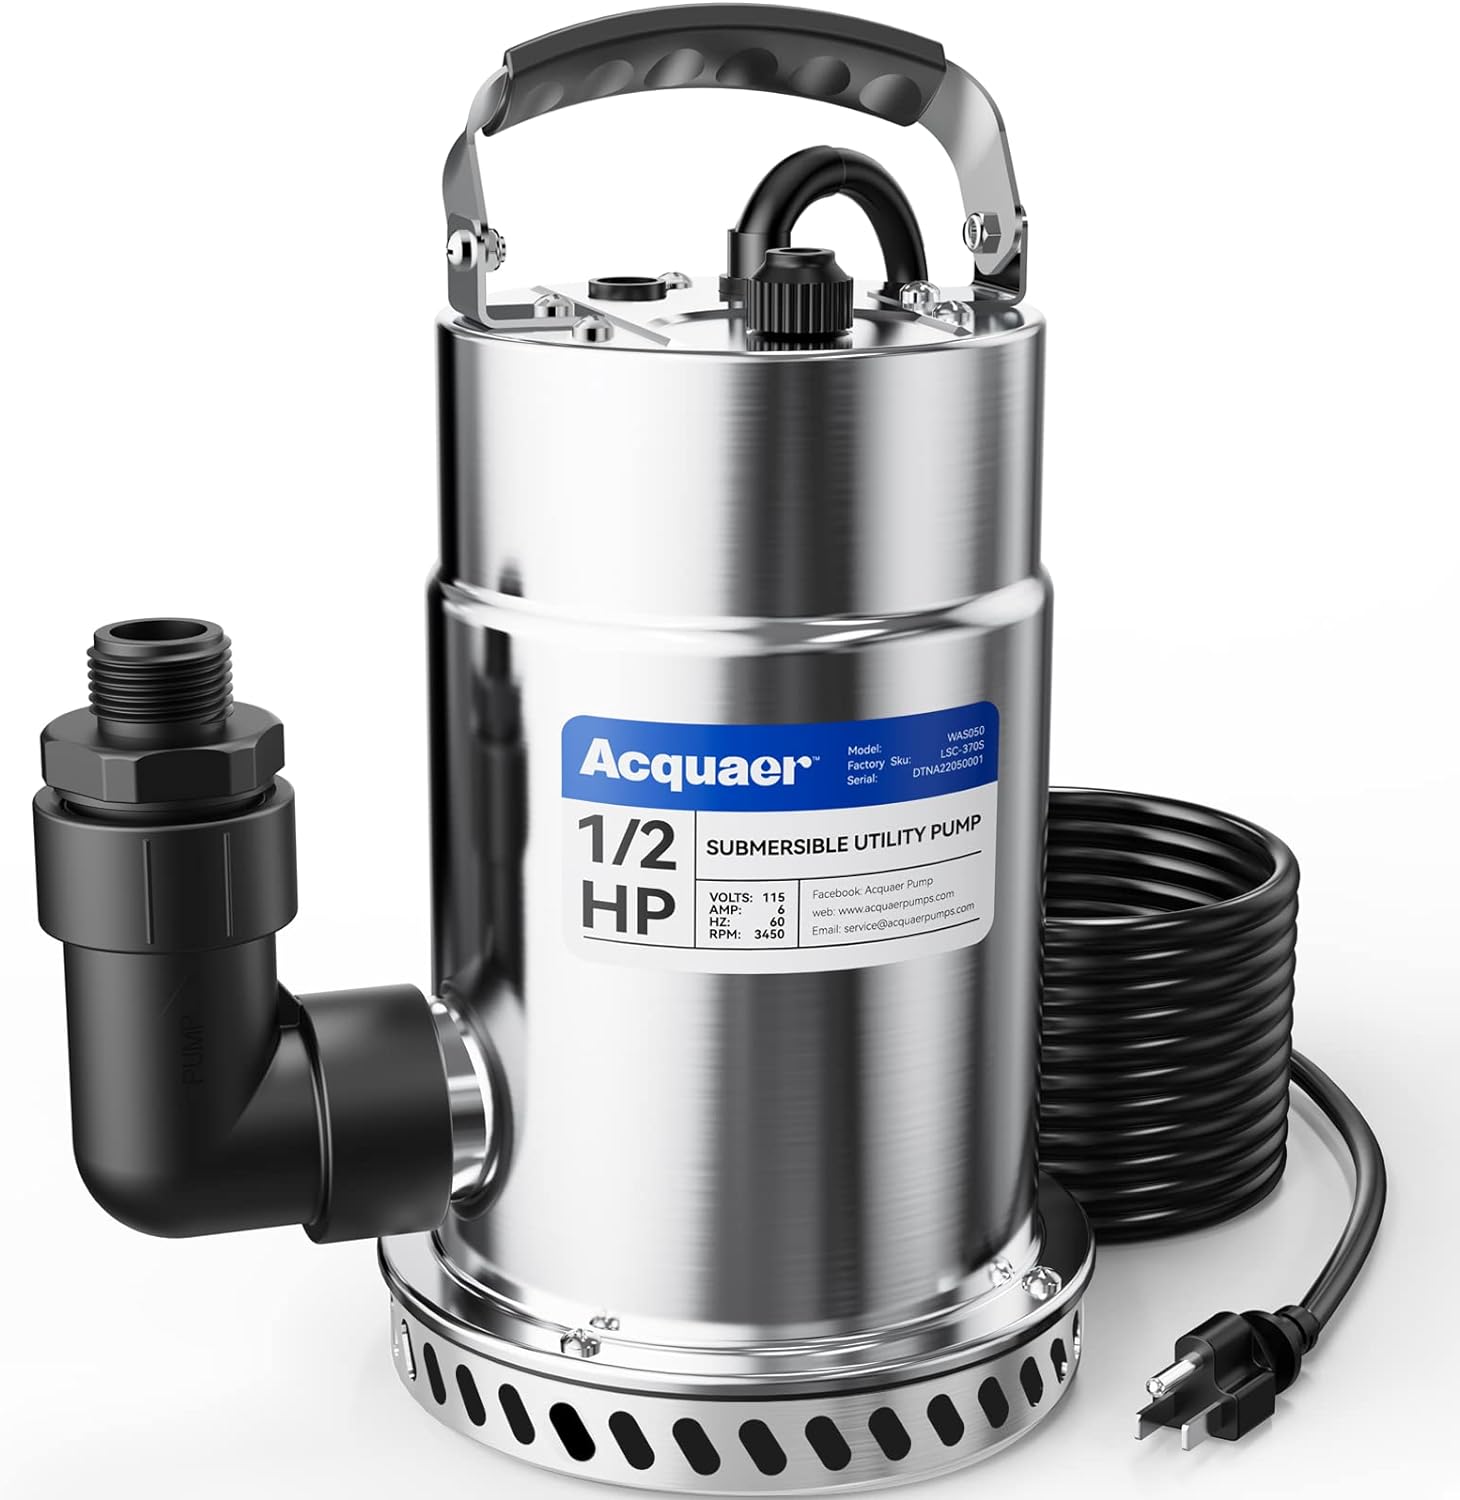 Acquaer 1/2HP Submersible Utility Pump, 3030GPH Stainless Steel Sump Pump, Water Removal for Basement Hot Tub Pool Cover Draining, 30ft